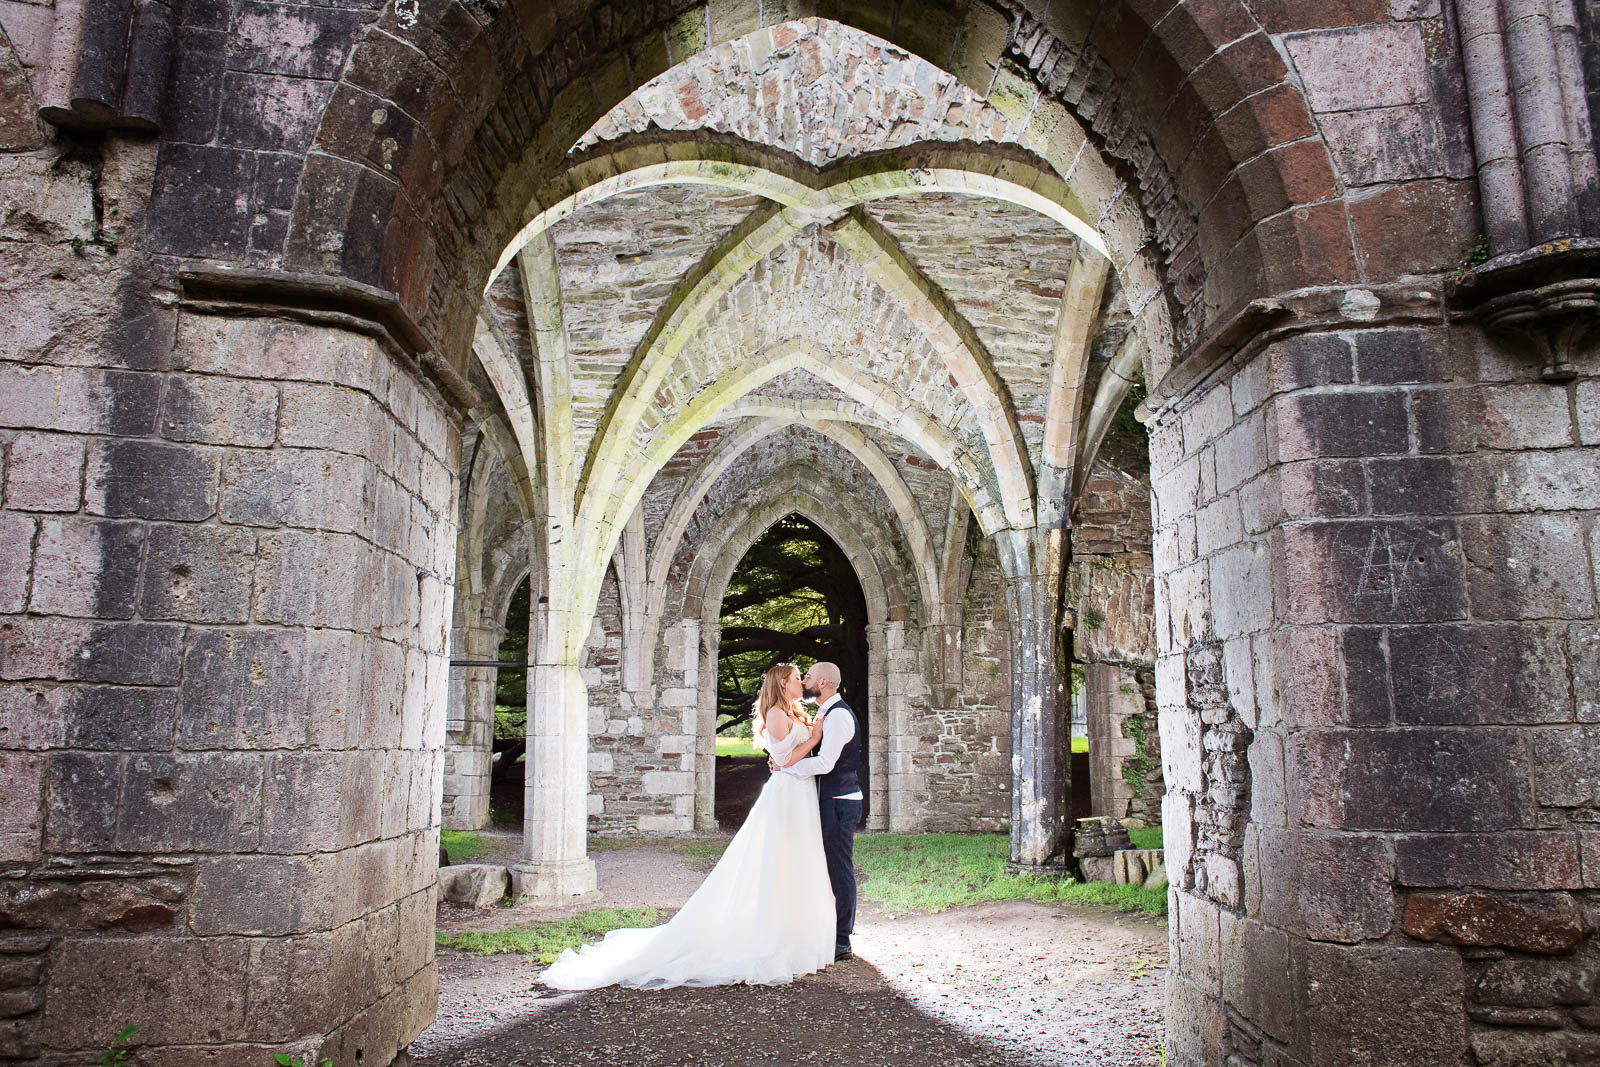 Bride & Groom kiss in archway of Magram Country Park